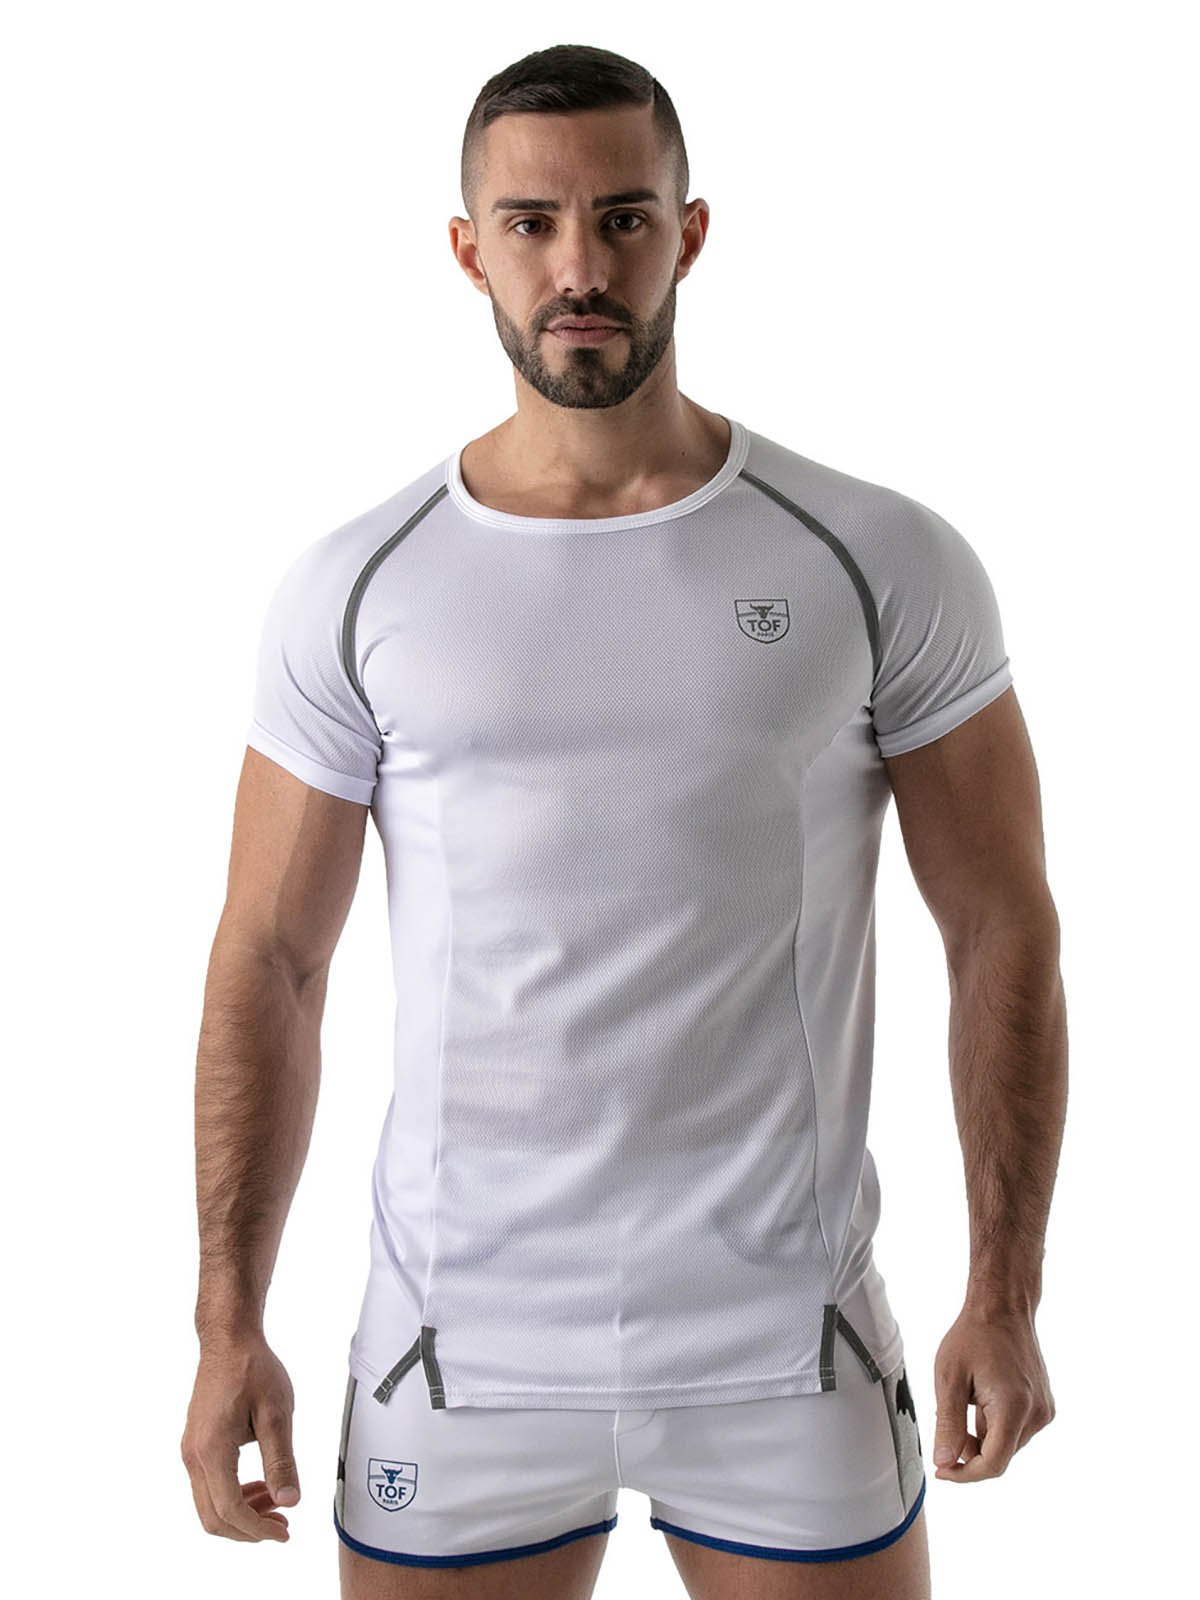 Total Protection T-Shirt | White